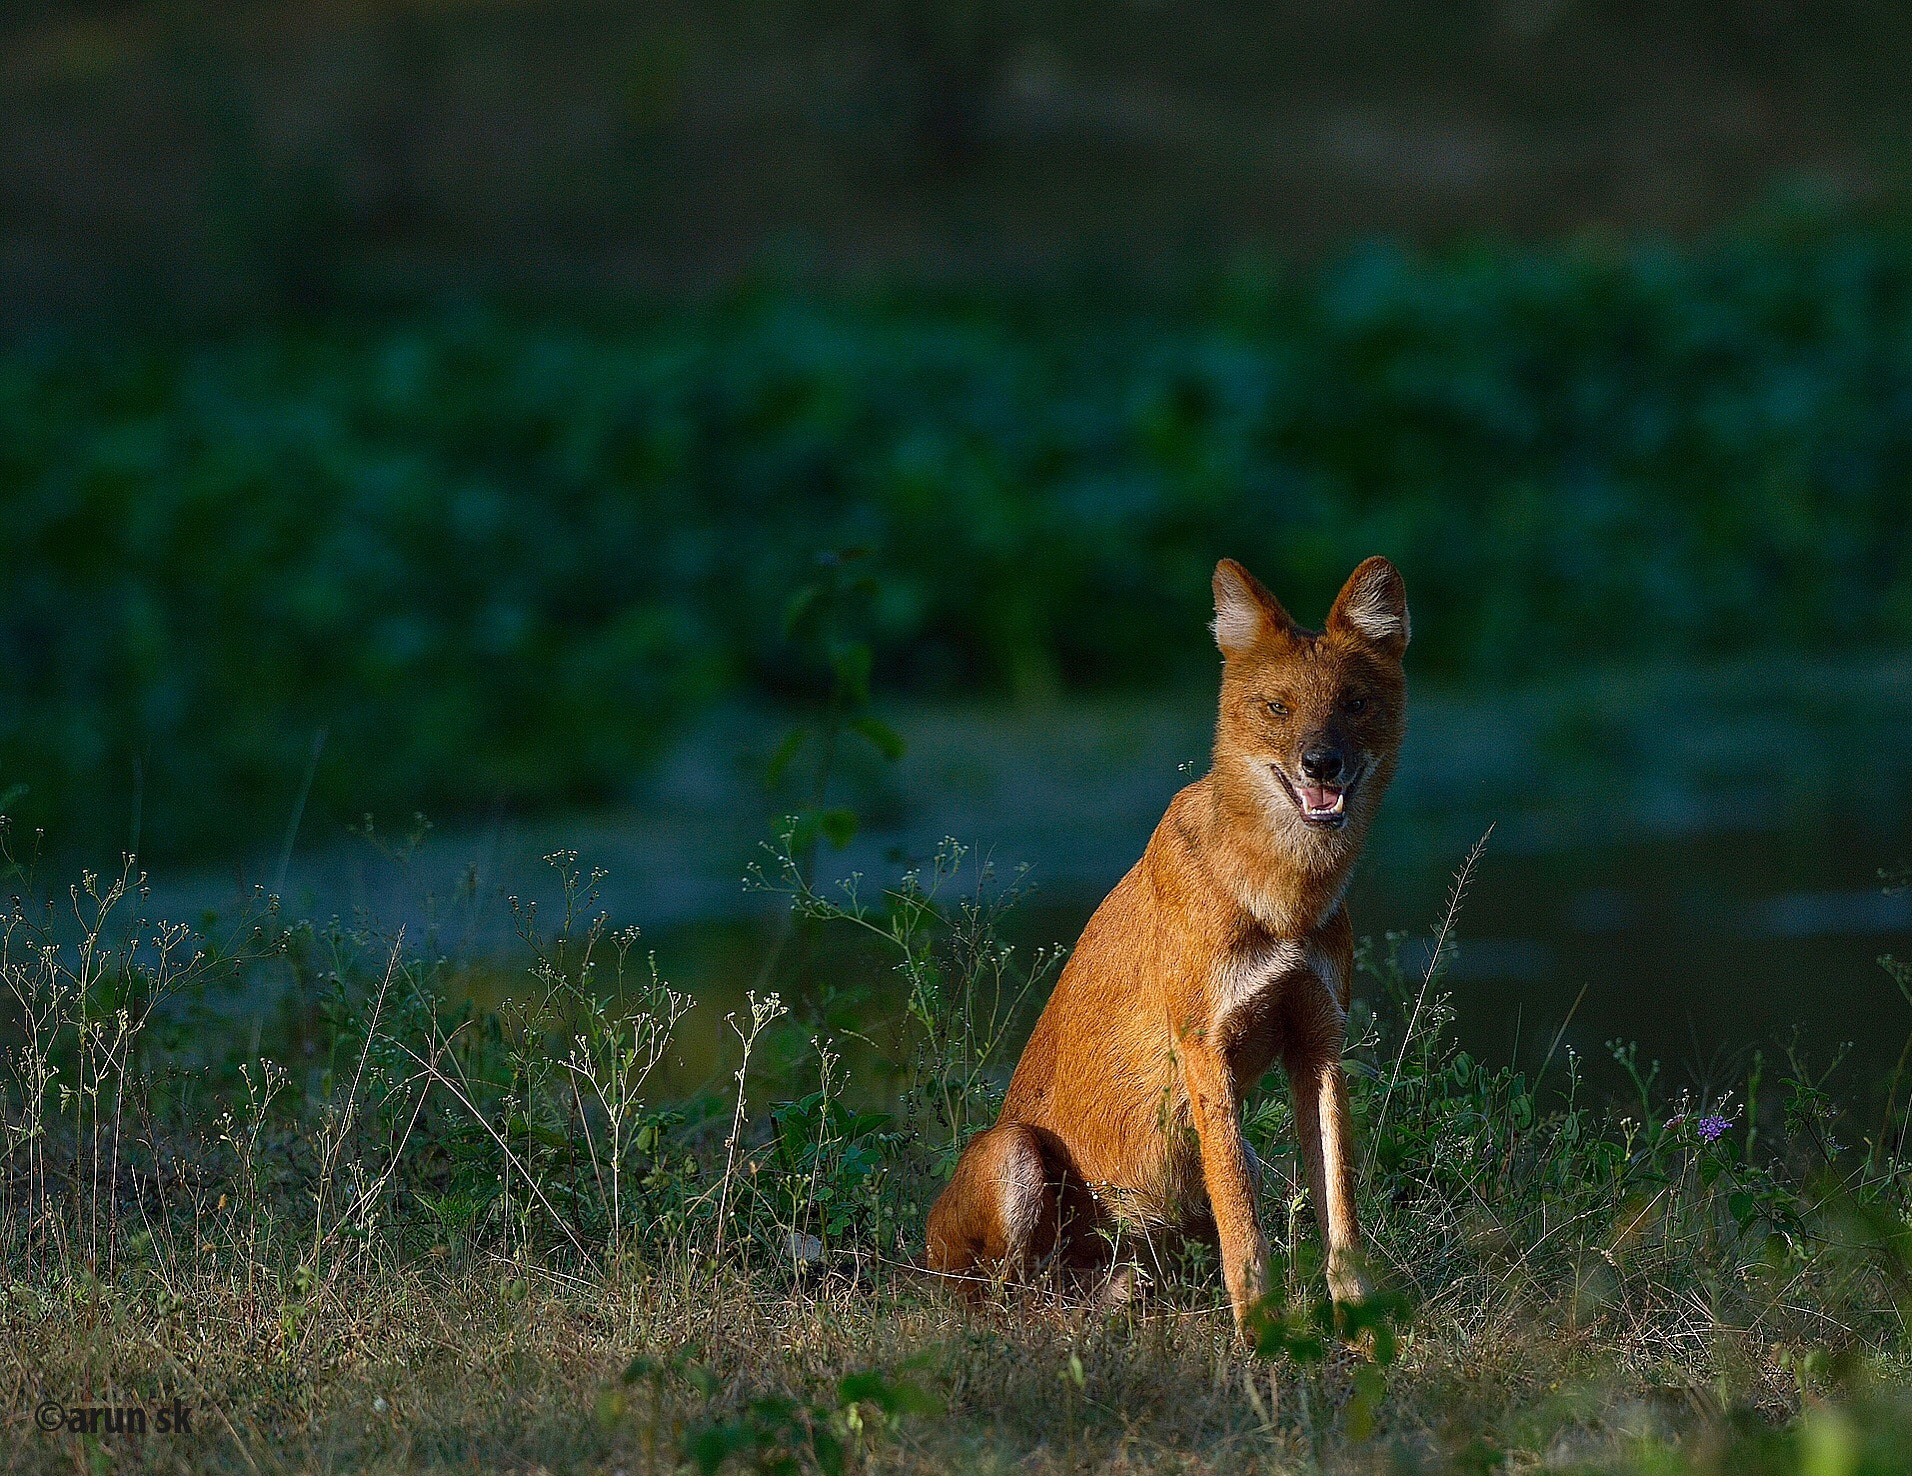 Nikon D4 sample photo. Wild dog or the 'dhole' in the jungles of south india ... photography